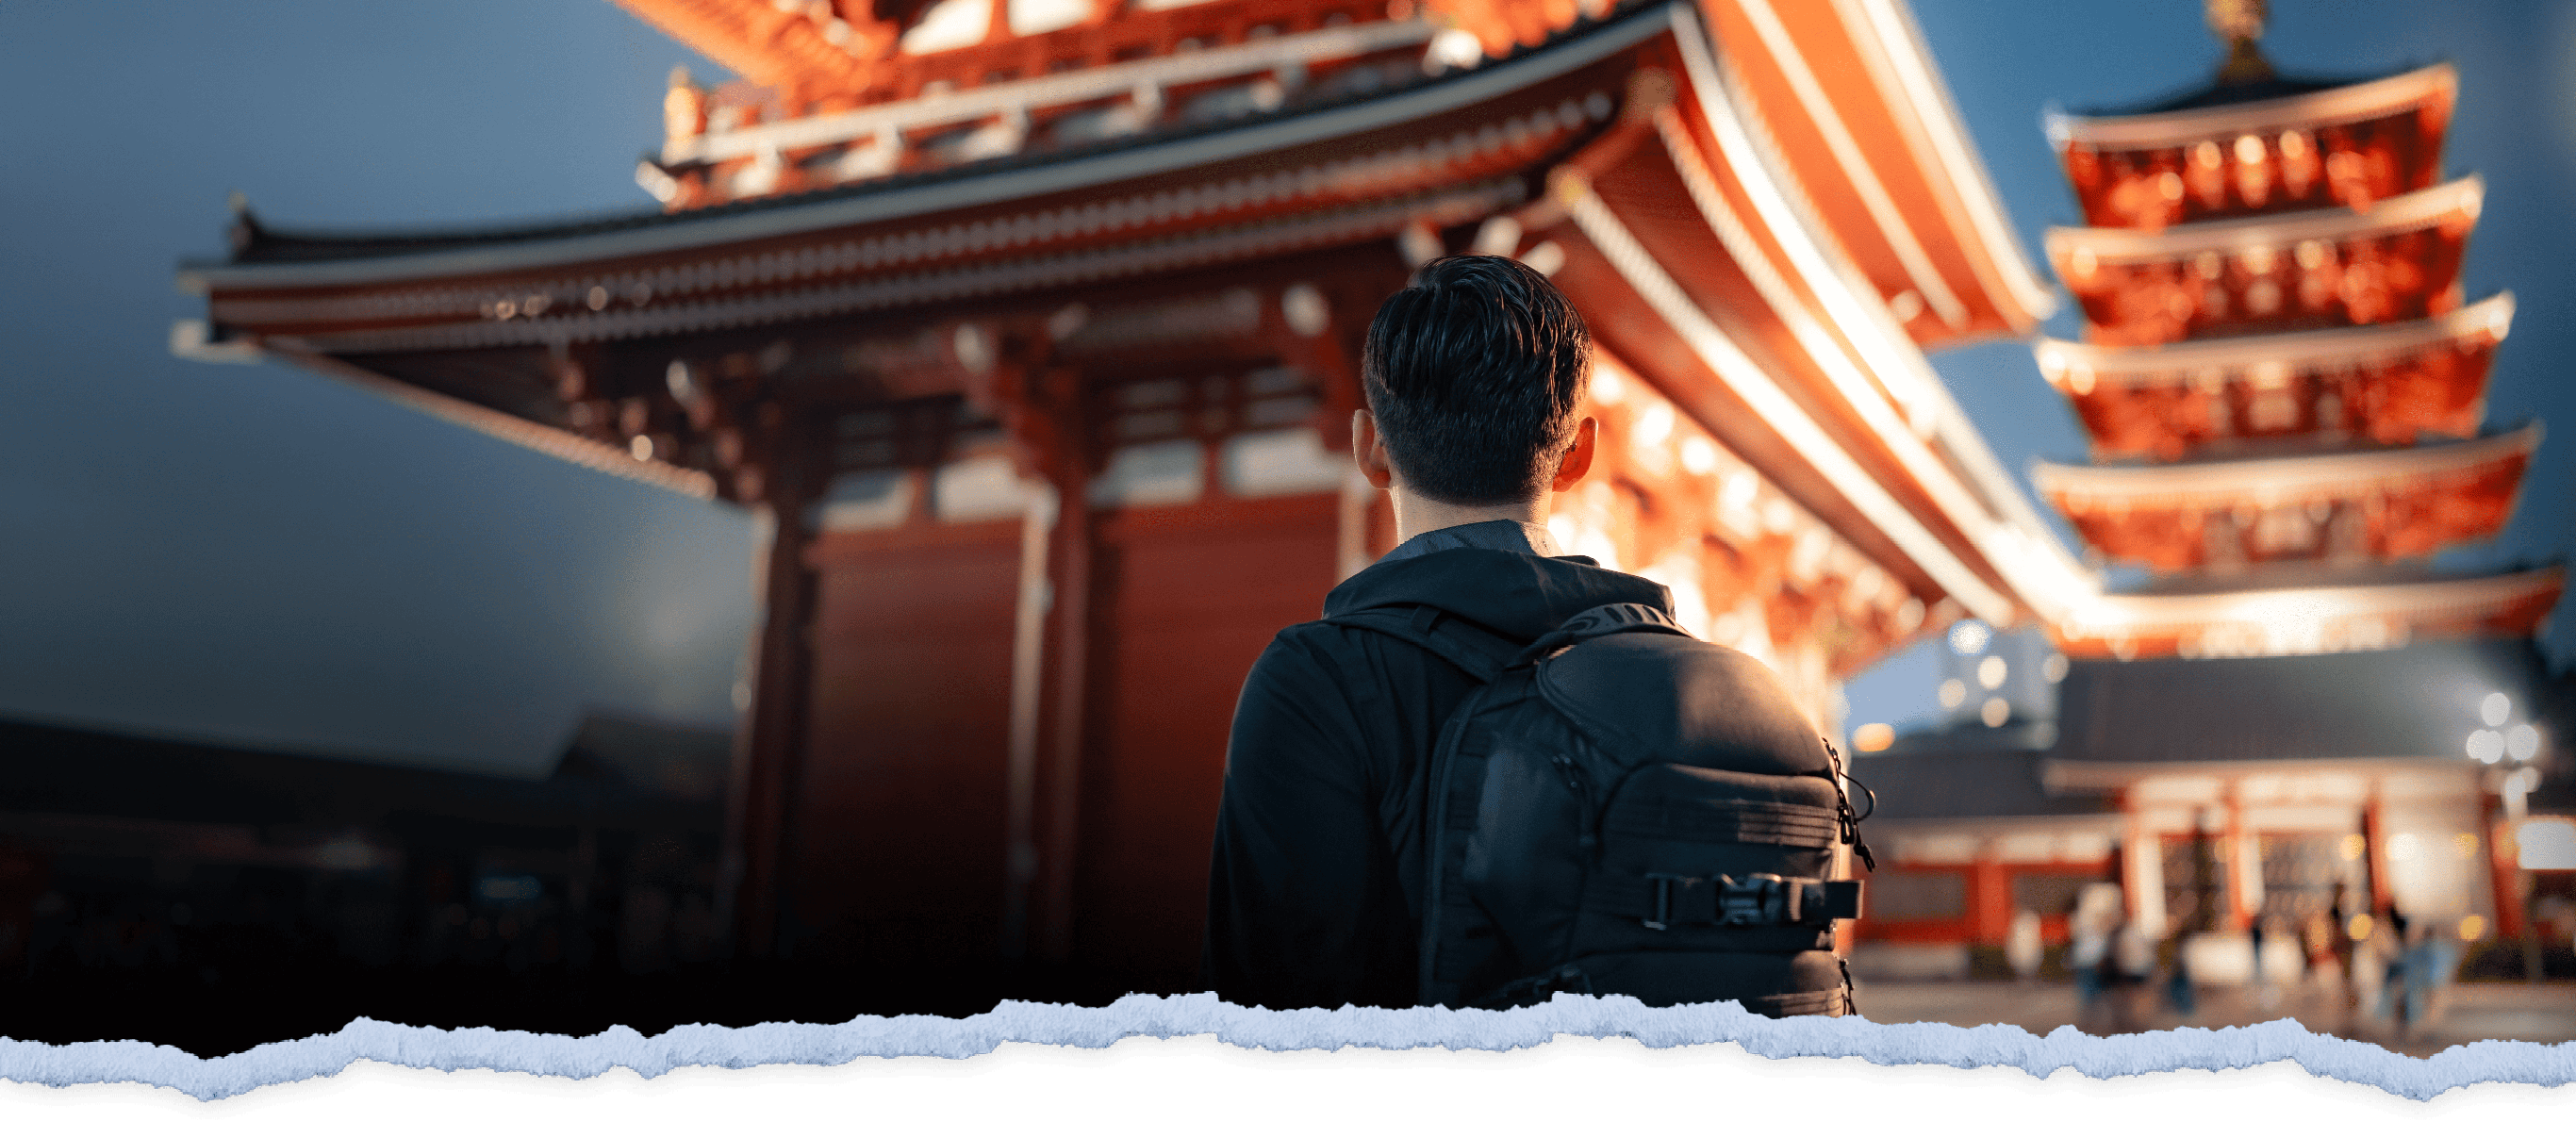 A traveler with a backpack sitting and looking at a traditional Japanese temple with striking red and white structures under a clear sky at dusk.